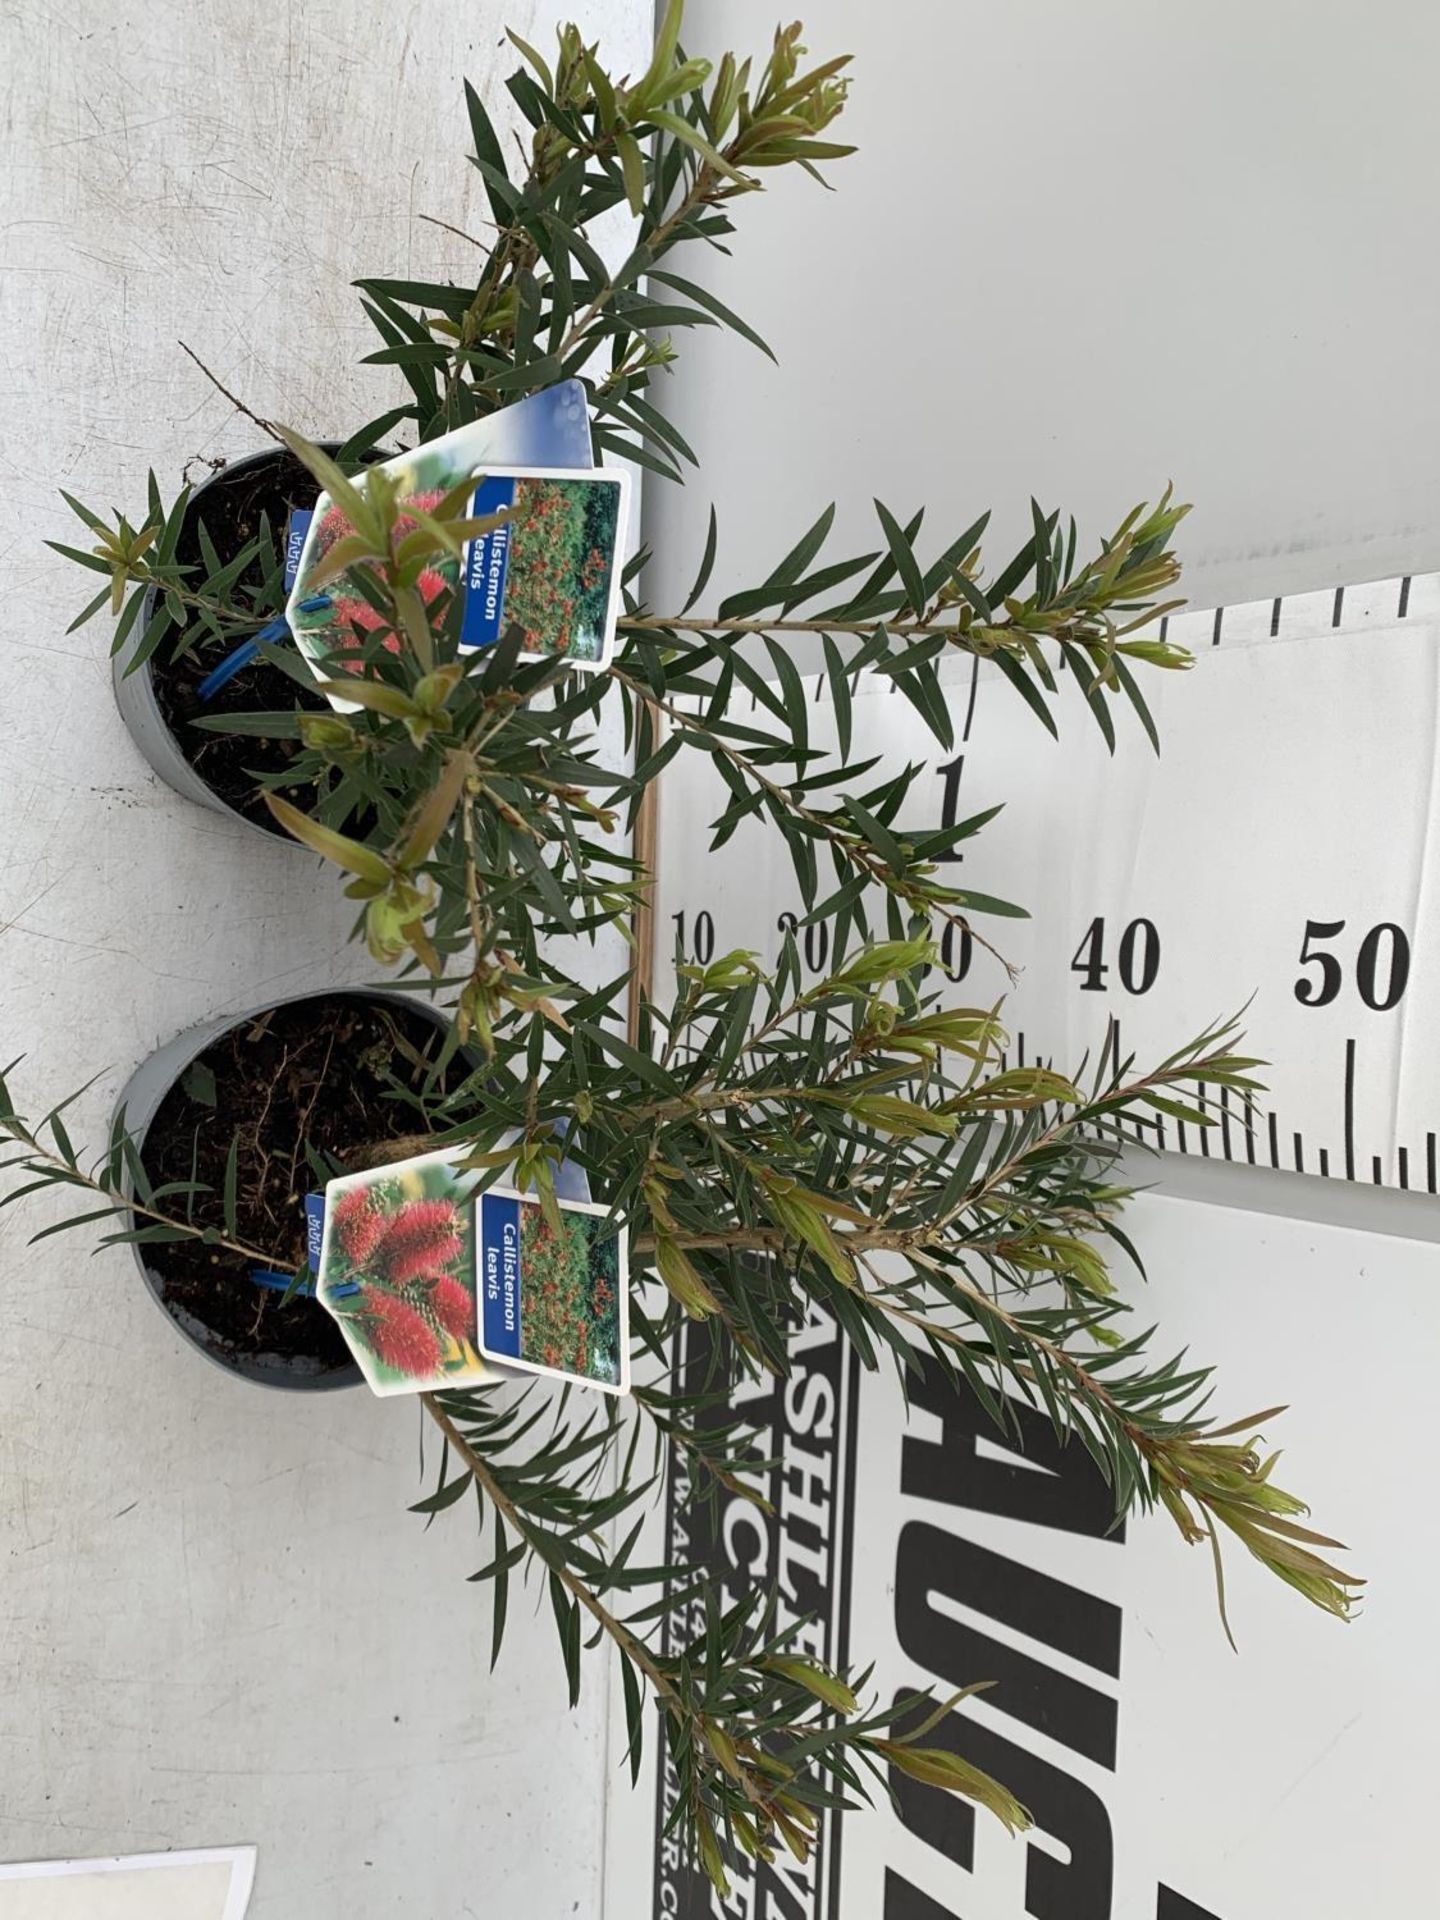 TWO CALLISTEMON LAEVIS IN 2 LTR POTS 50CM TALL PLUS VAT TO BE SOLD FOR THE TWO - Image 4 of 10